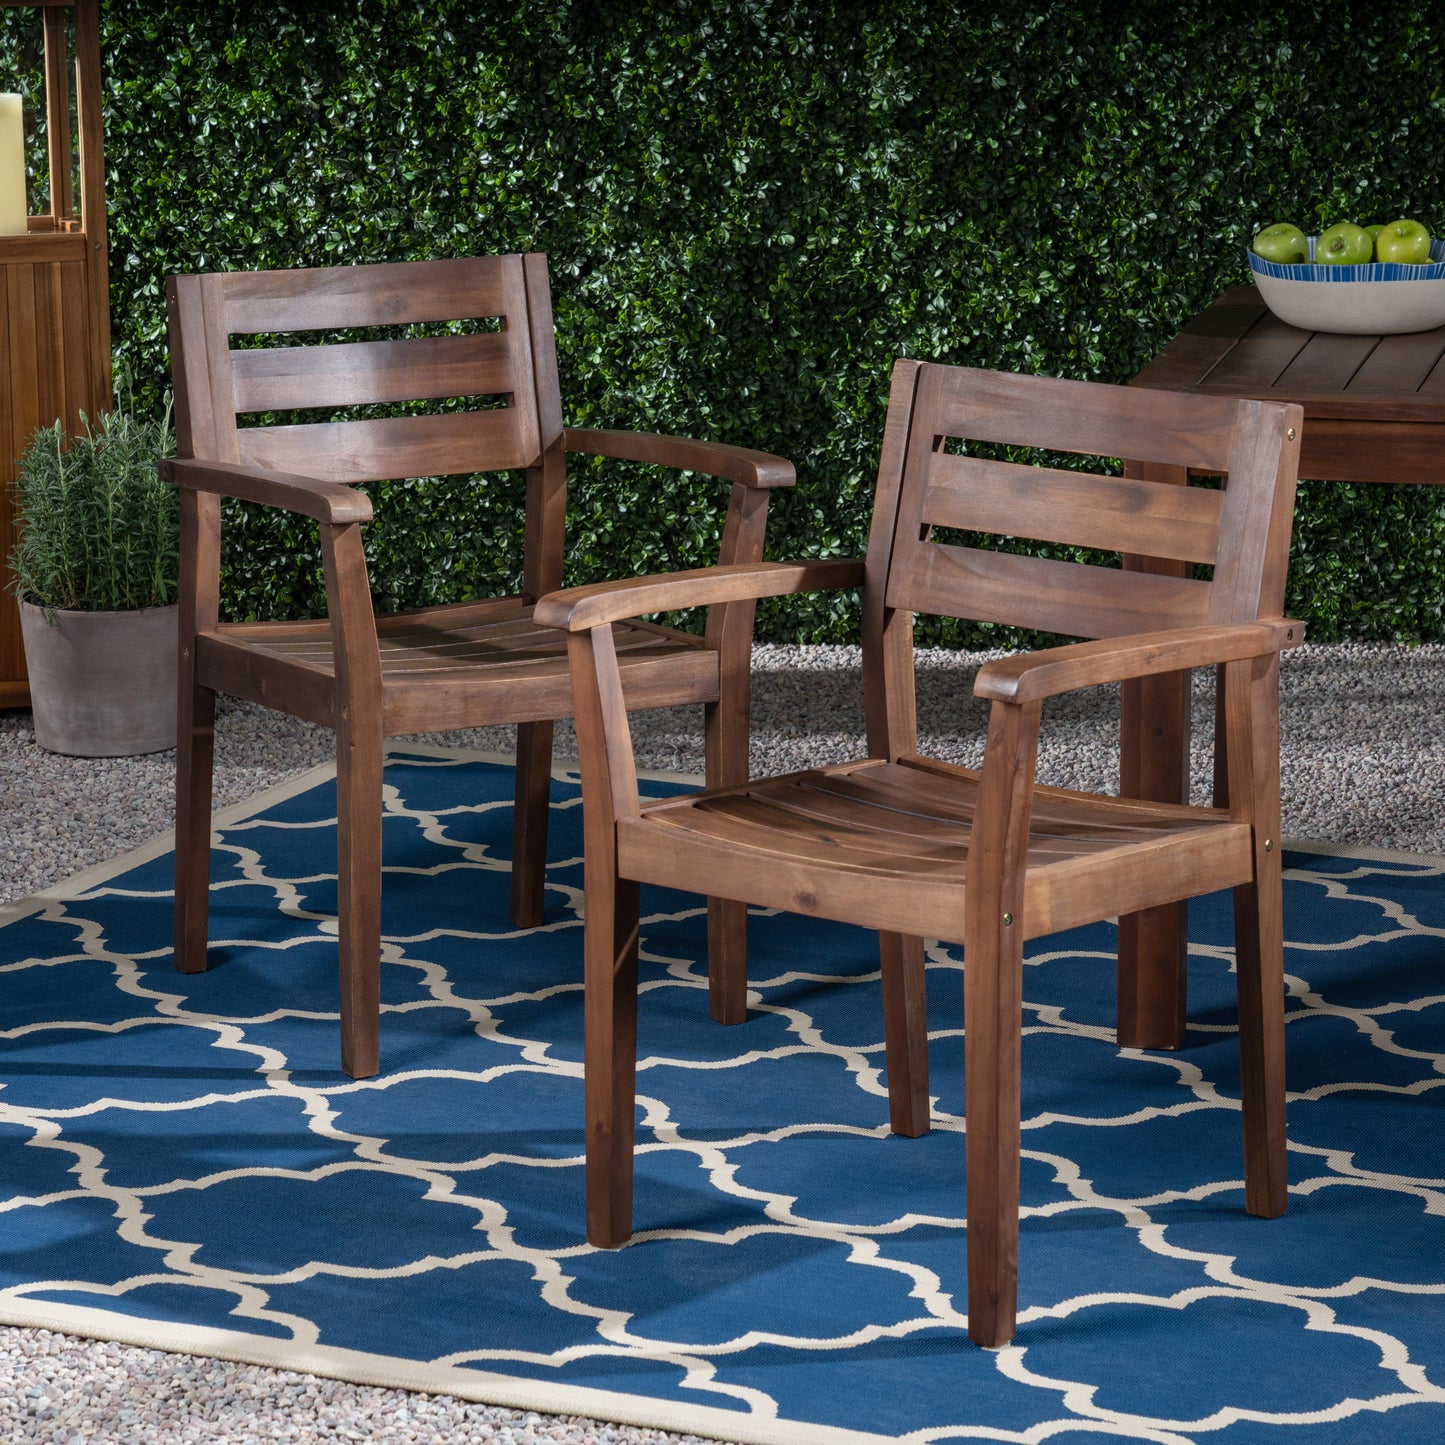 Stanford Outdoor Rustic Slat Acacia Wood Dining Chairs (Set of 2)